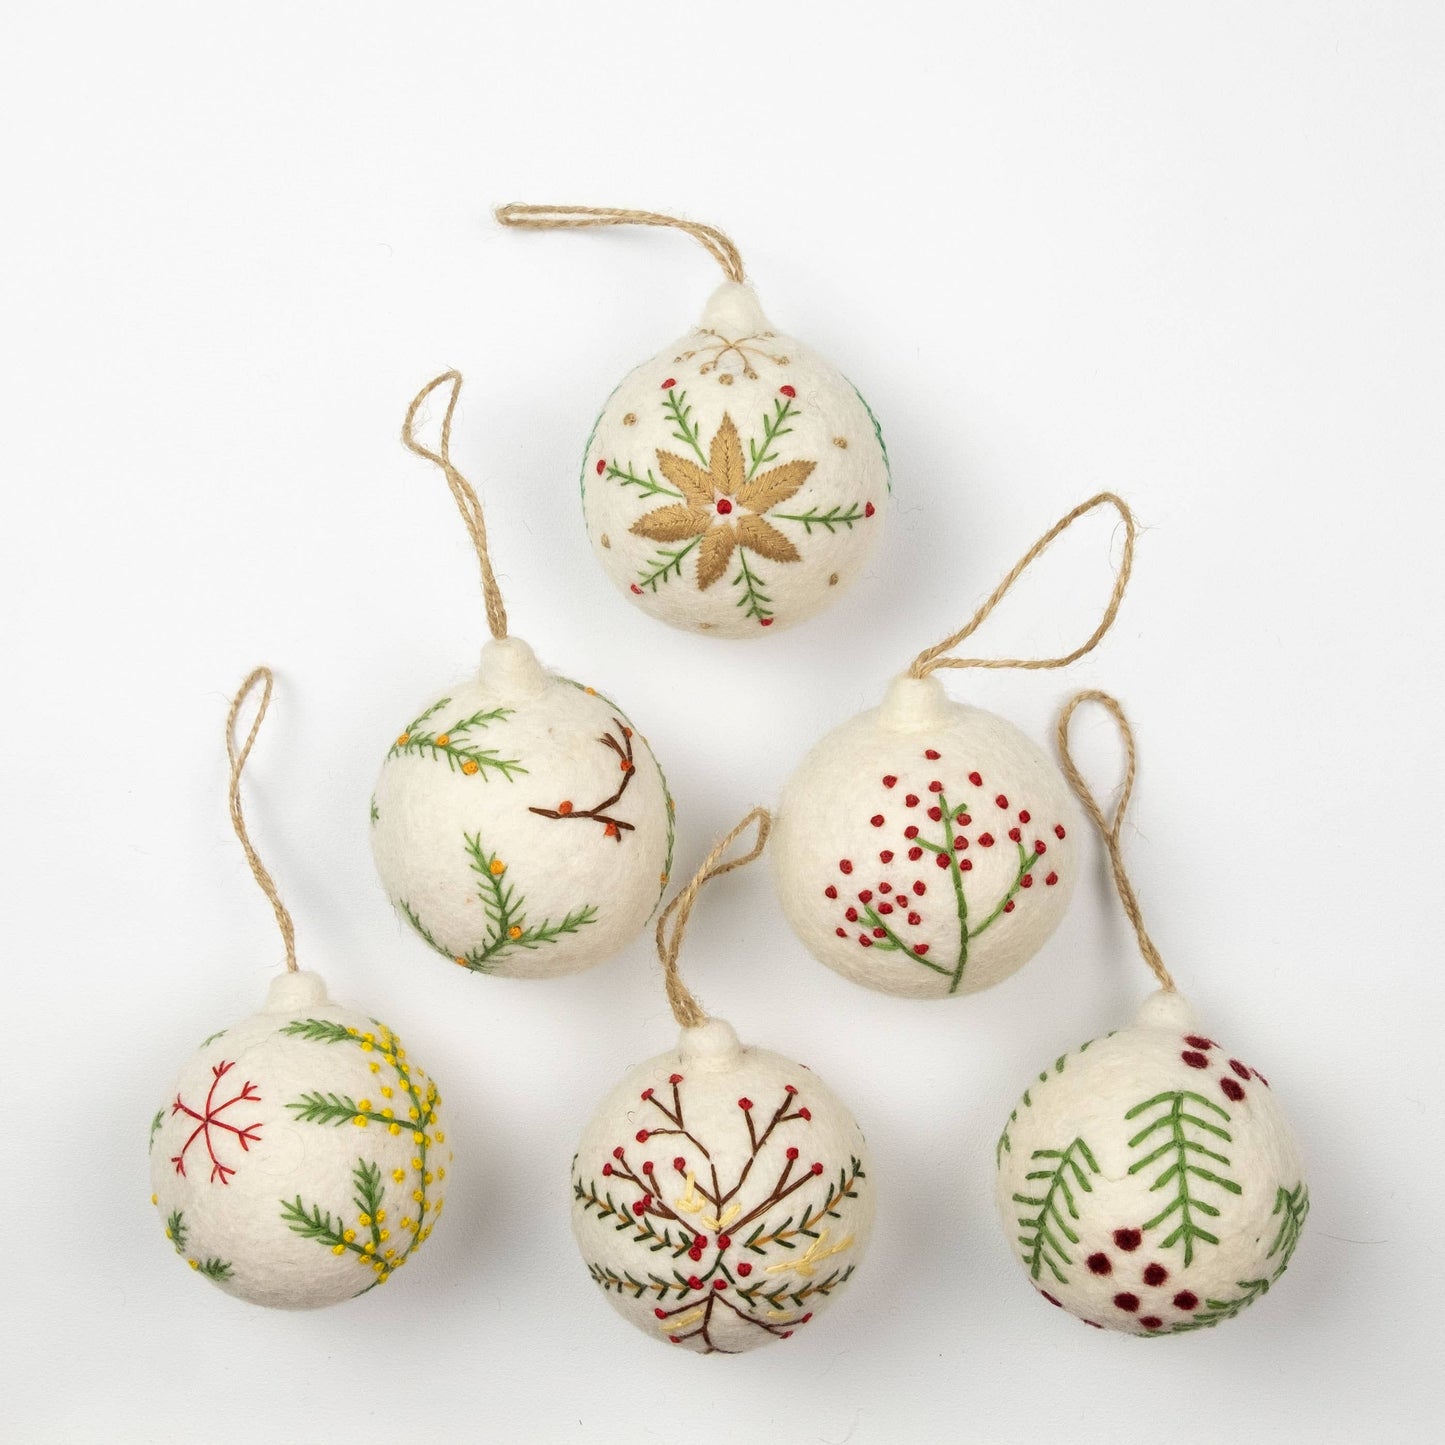 Hand Embroidered Felt Ornaments